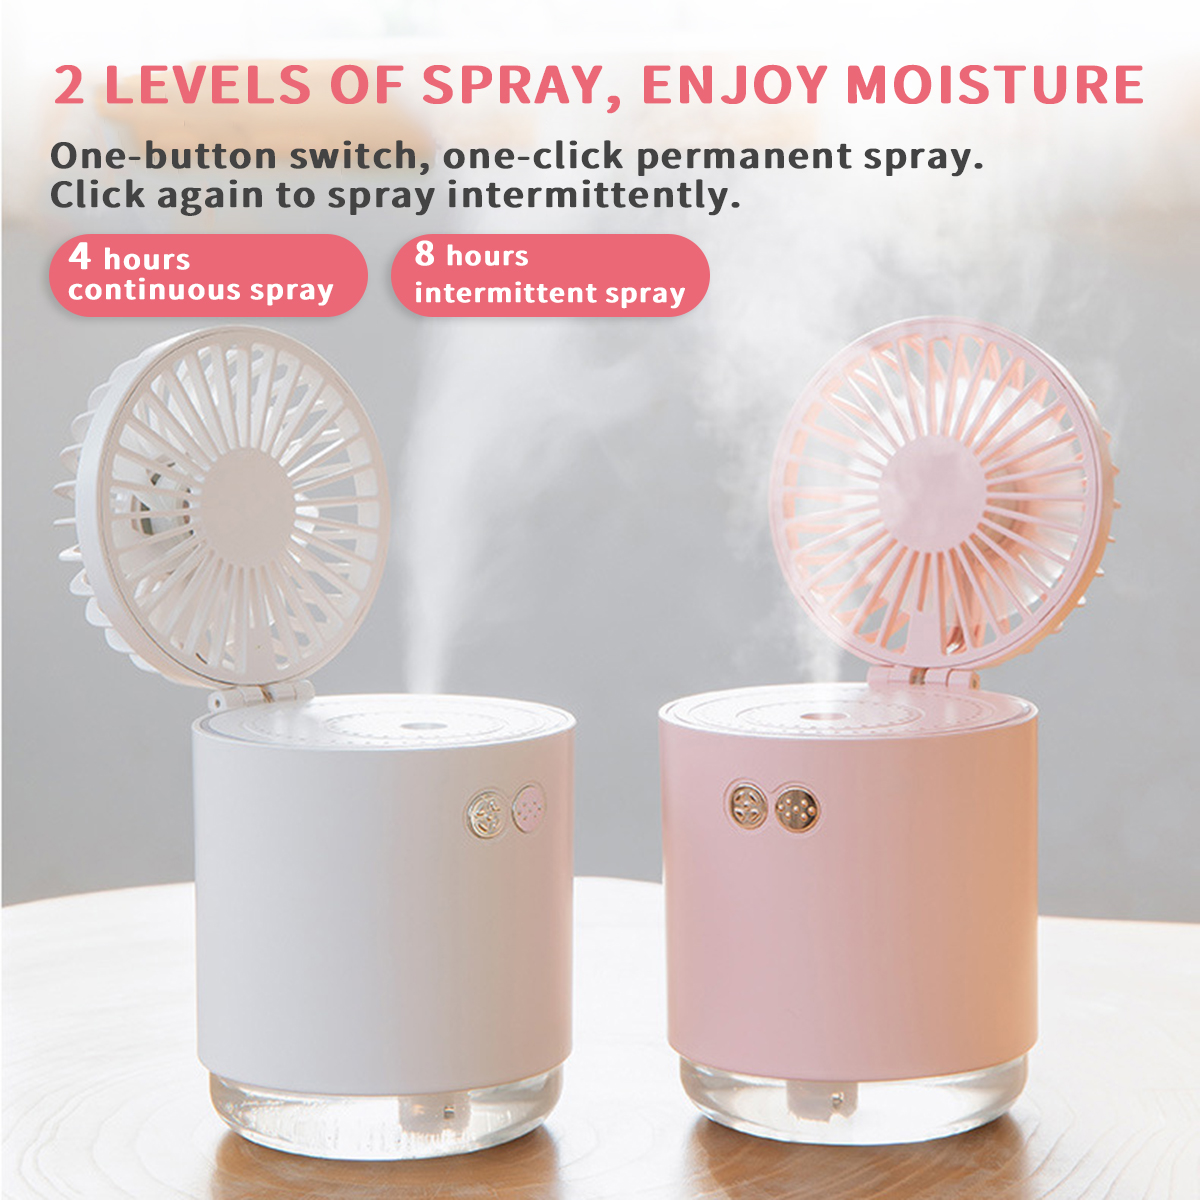 Multifunctional-2000mAh-Mini-USB-Rechargeable-Fan-Cooler-Desktop-Spray-Humidification-with-Colorful--1864518-12